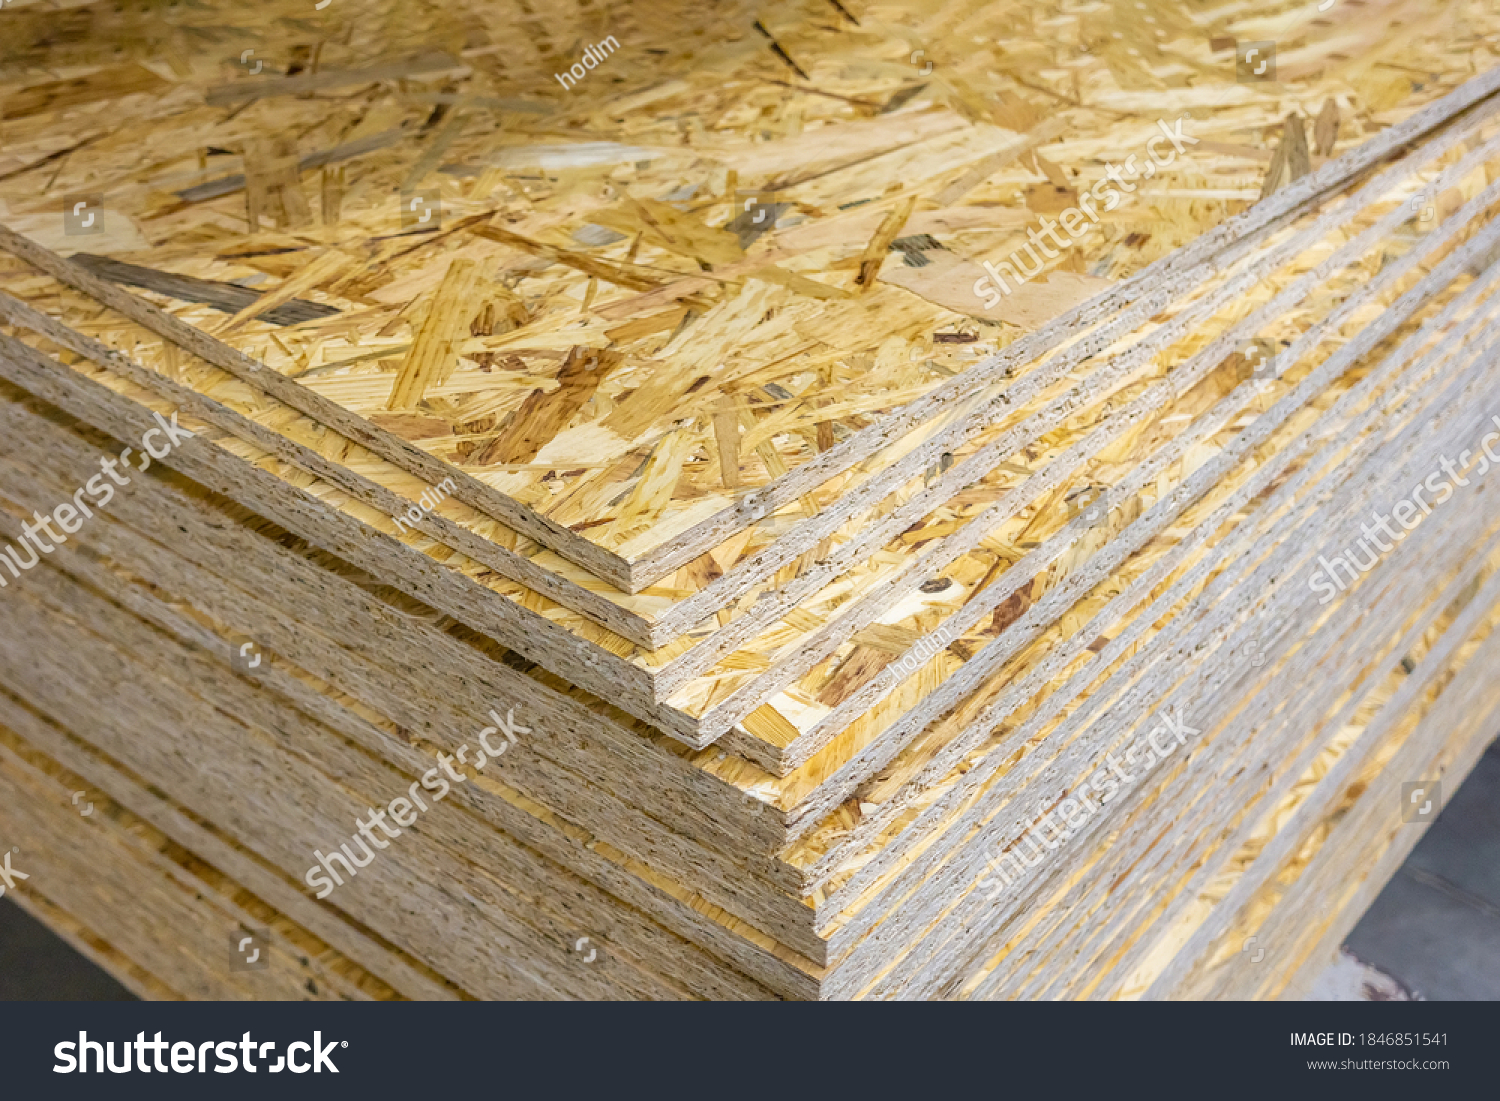 OSB - Oriented strand board. Stacked OSB sheets. Sheet material for the construction of frame houses #1846851541